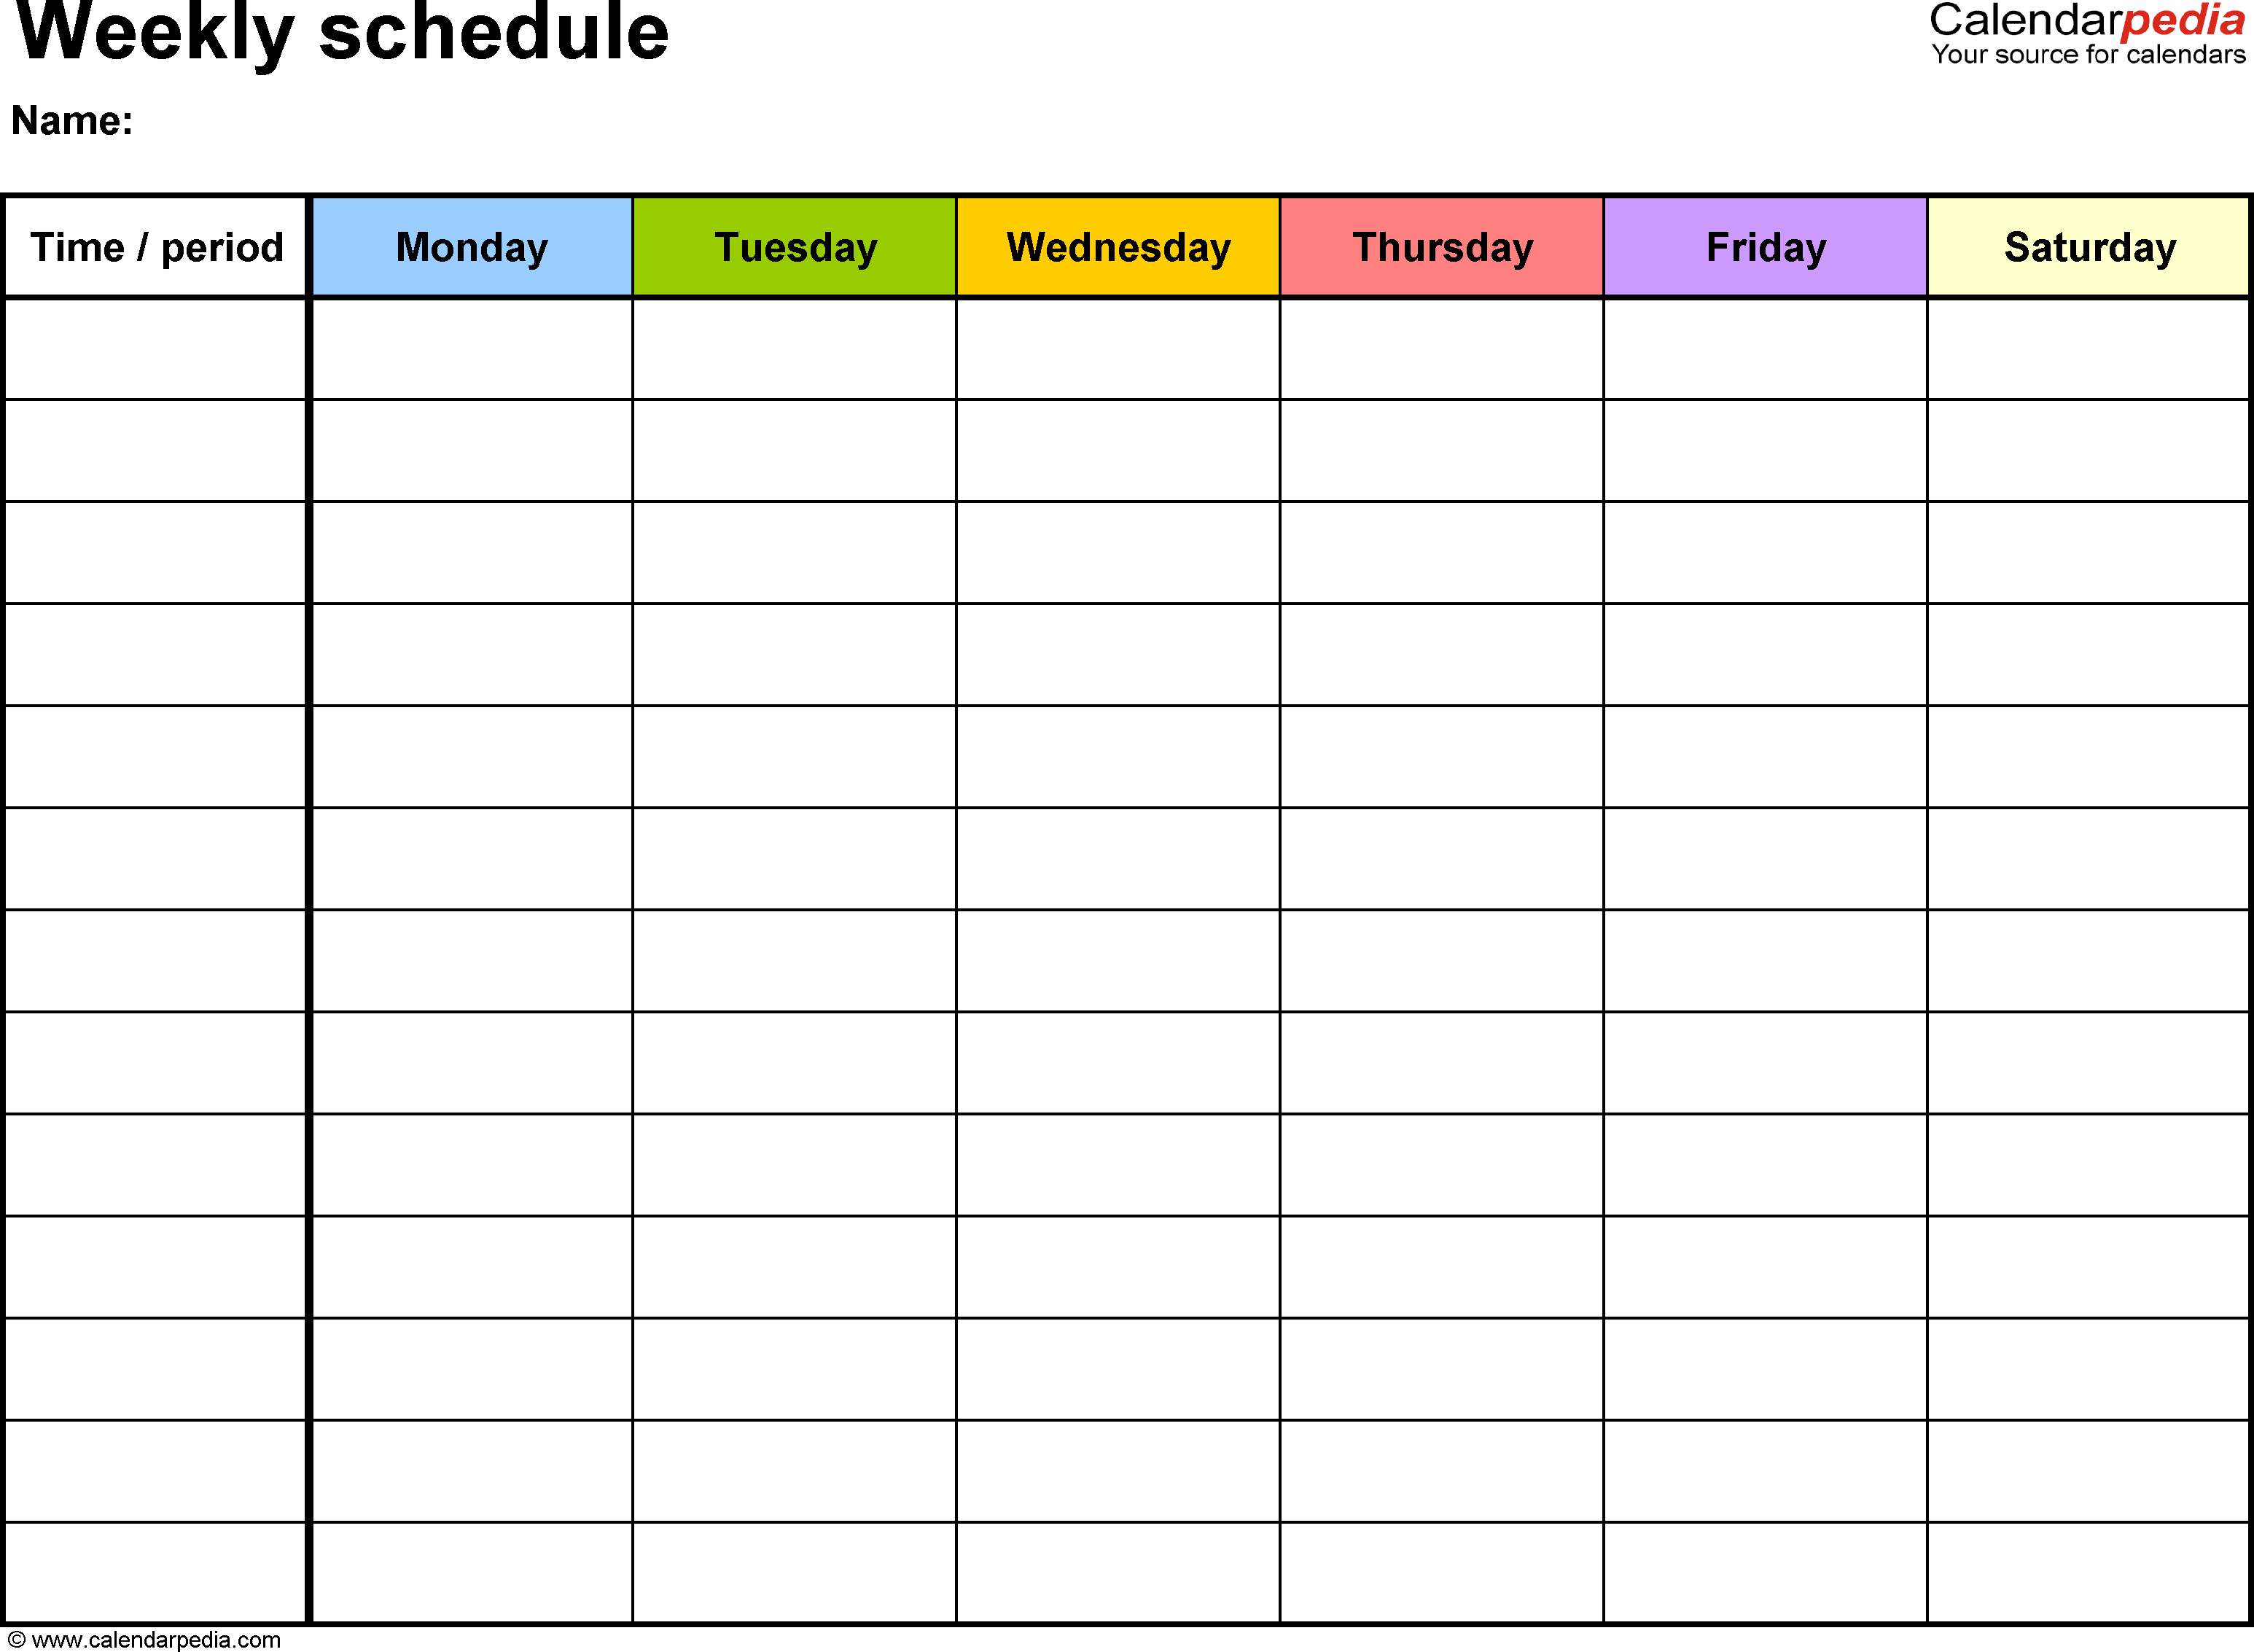 Free Weekly Schedule Templates for Word   18 templates